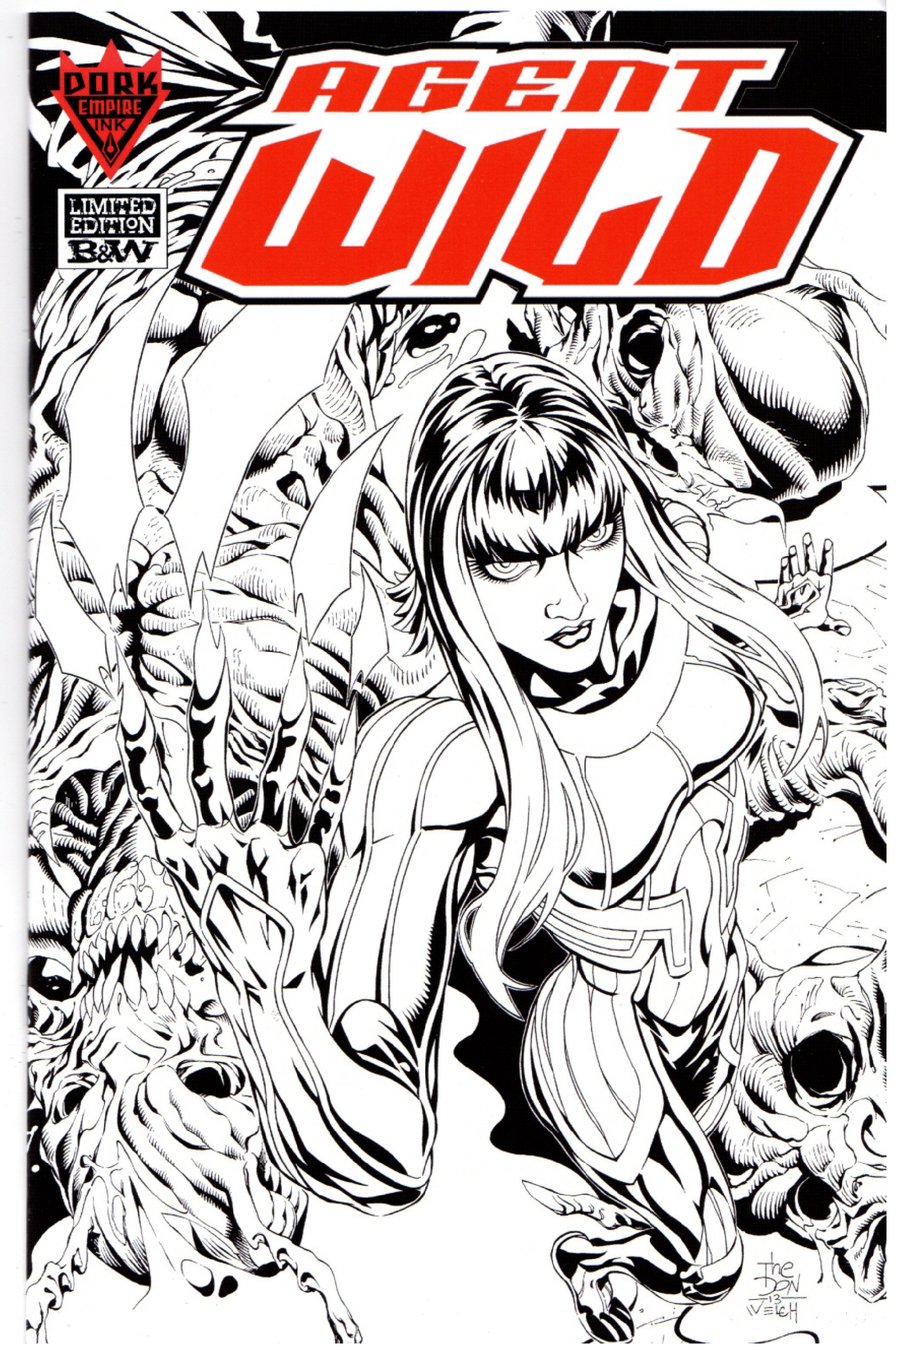 Image of AGENT WILD #0 / Limited Edition B&W